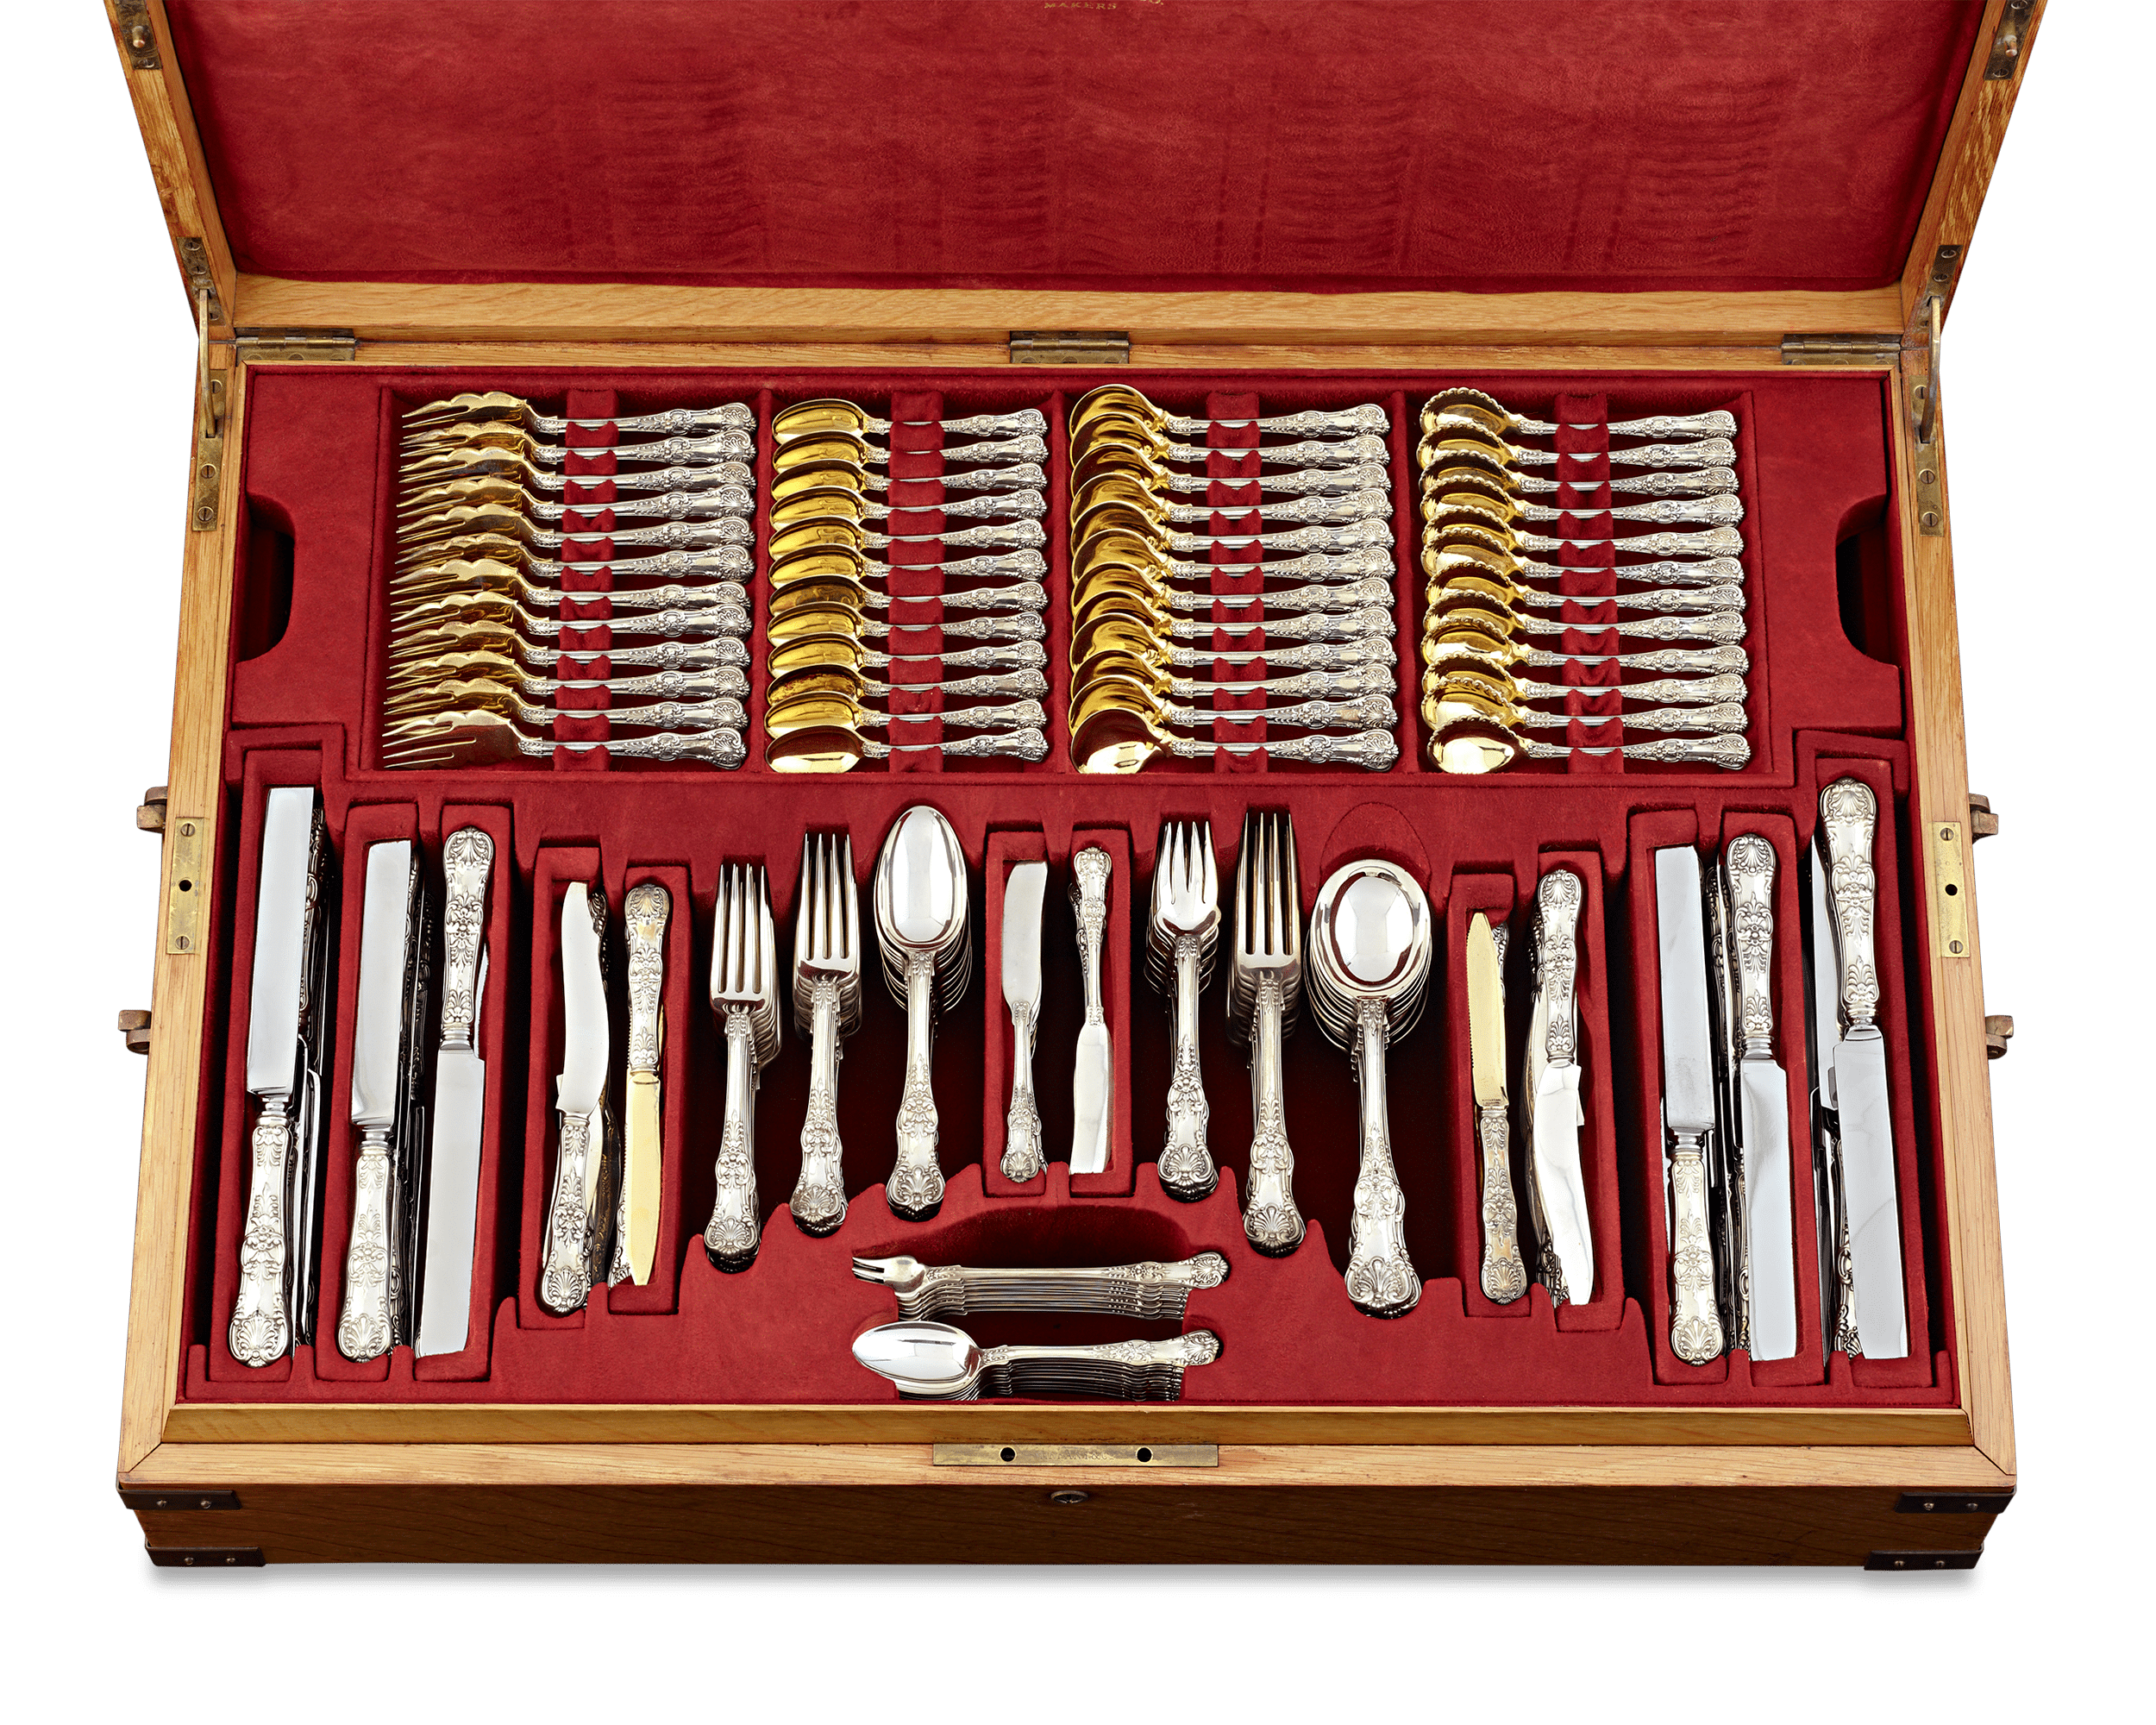 Tiffany & Co. English King Gilded Flatware Service, 216 Pieces